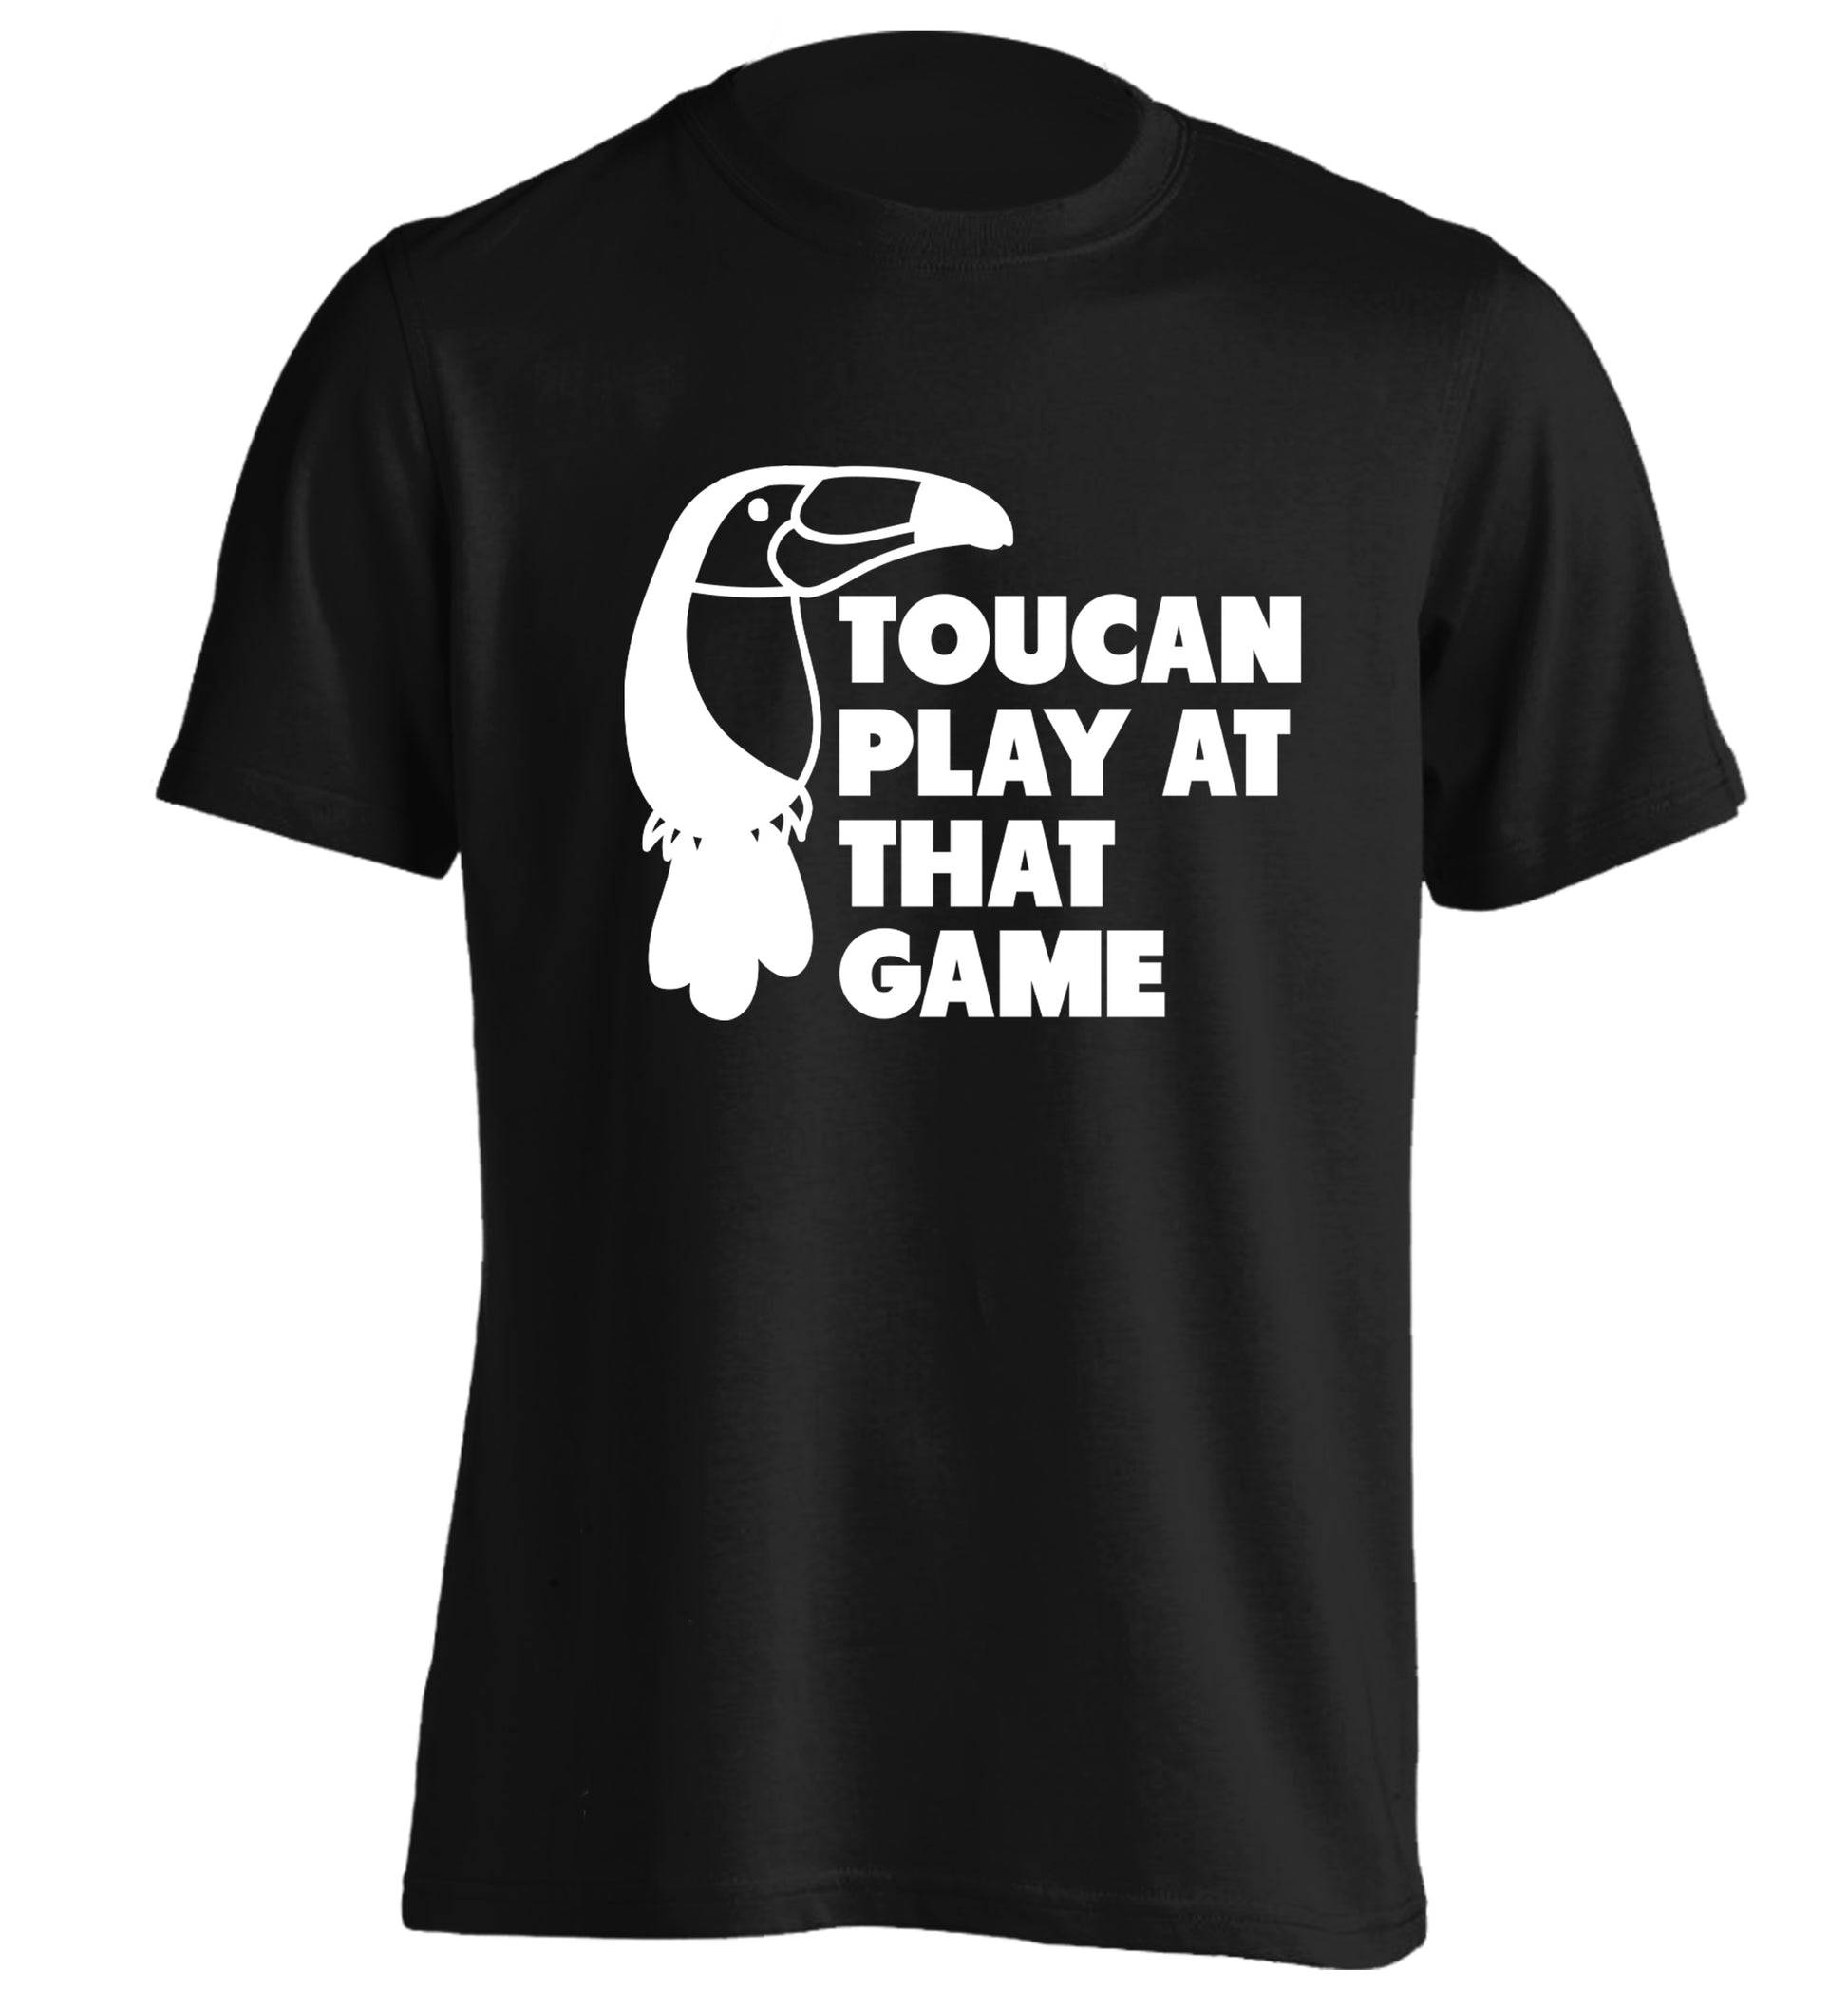 Toucan play at that game adults unisex black Tshirt 2XL